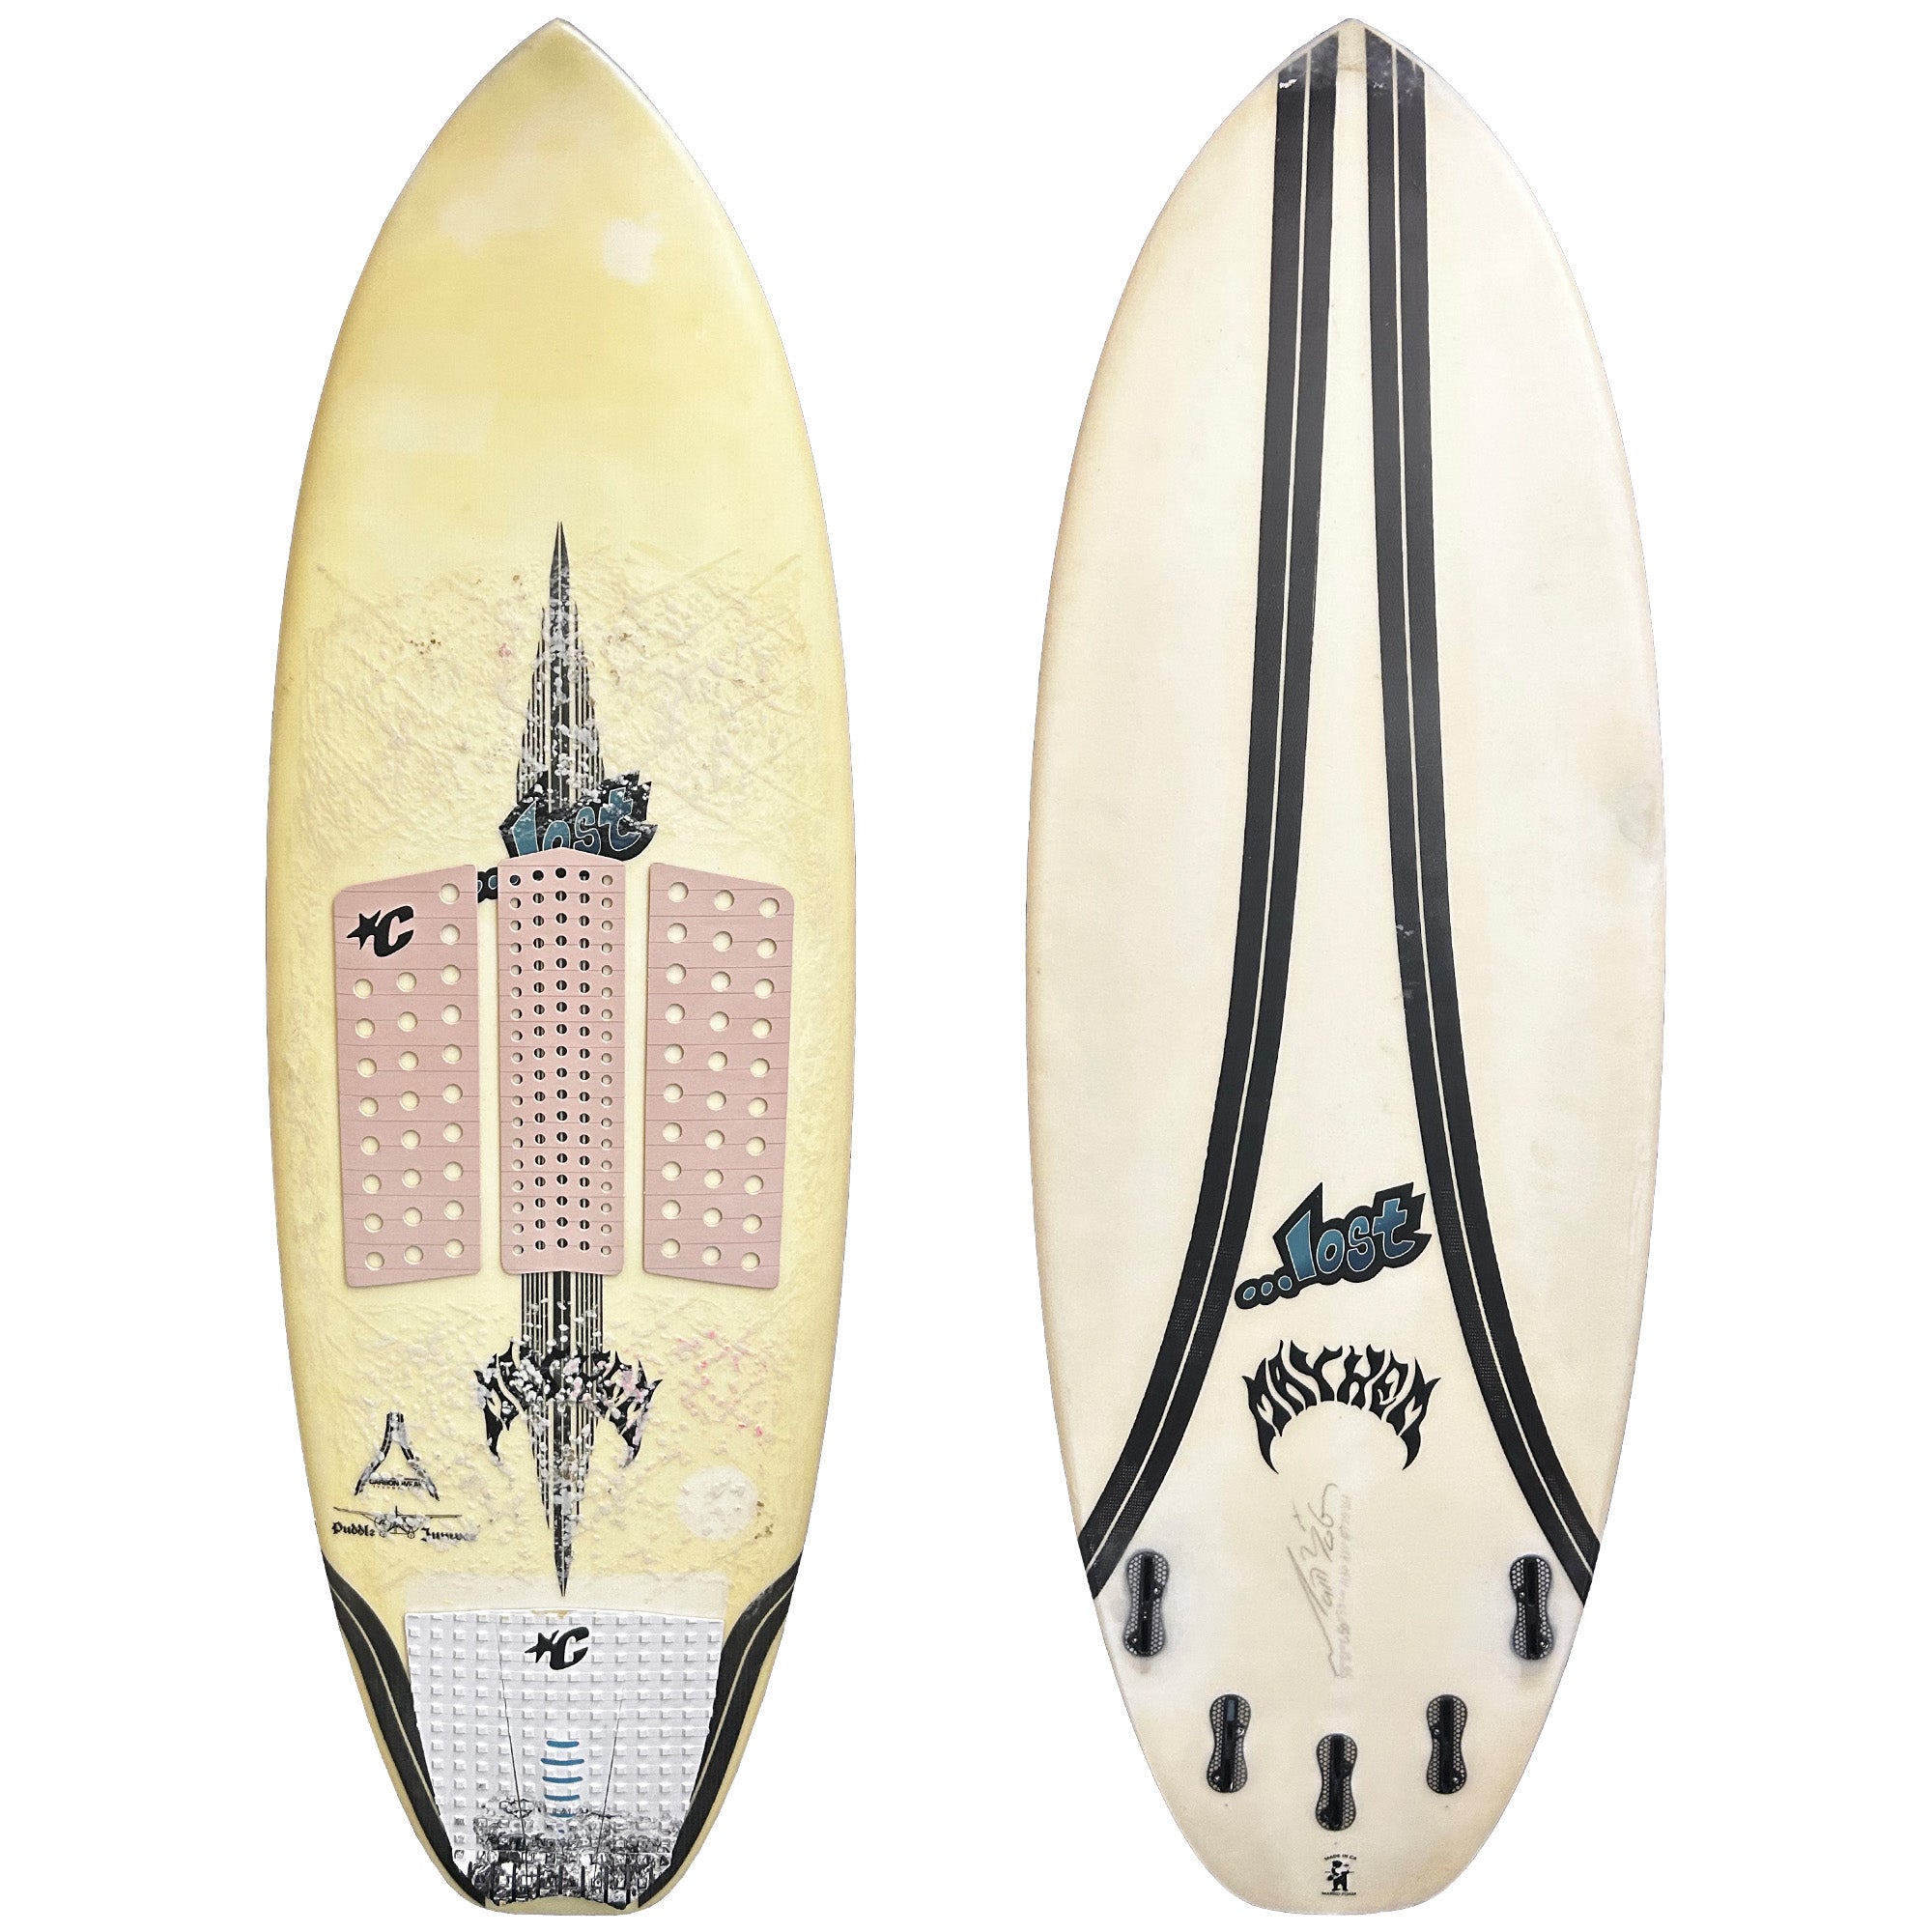 Lost Puddle Jumper 5'6 Consignment Surfboard